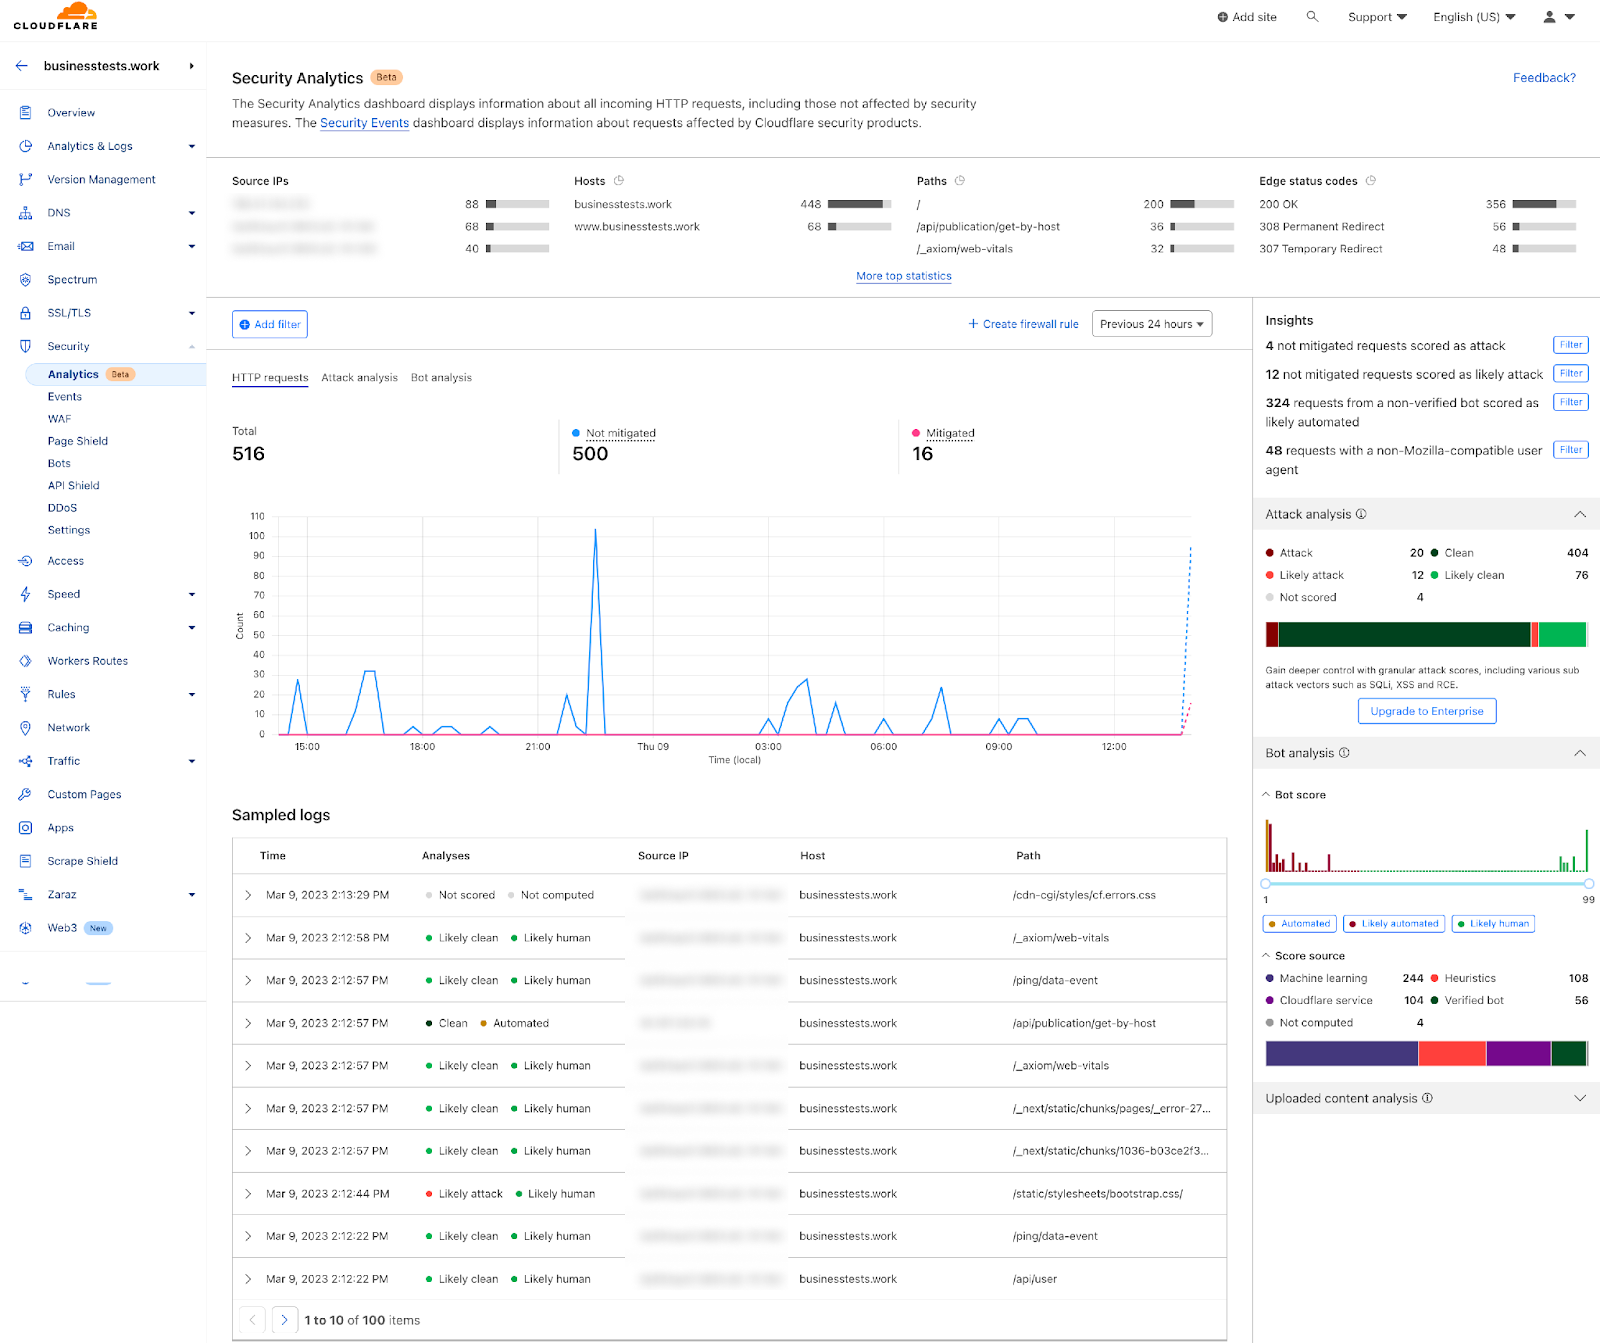 Screenshot from the dashboard showing the Security Analytics default view